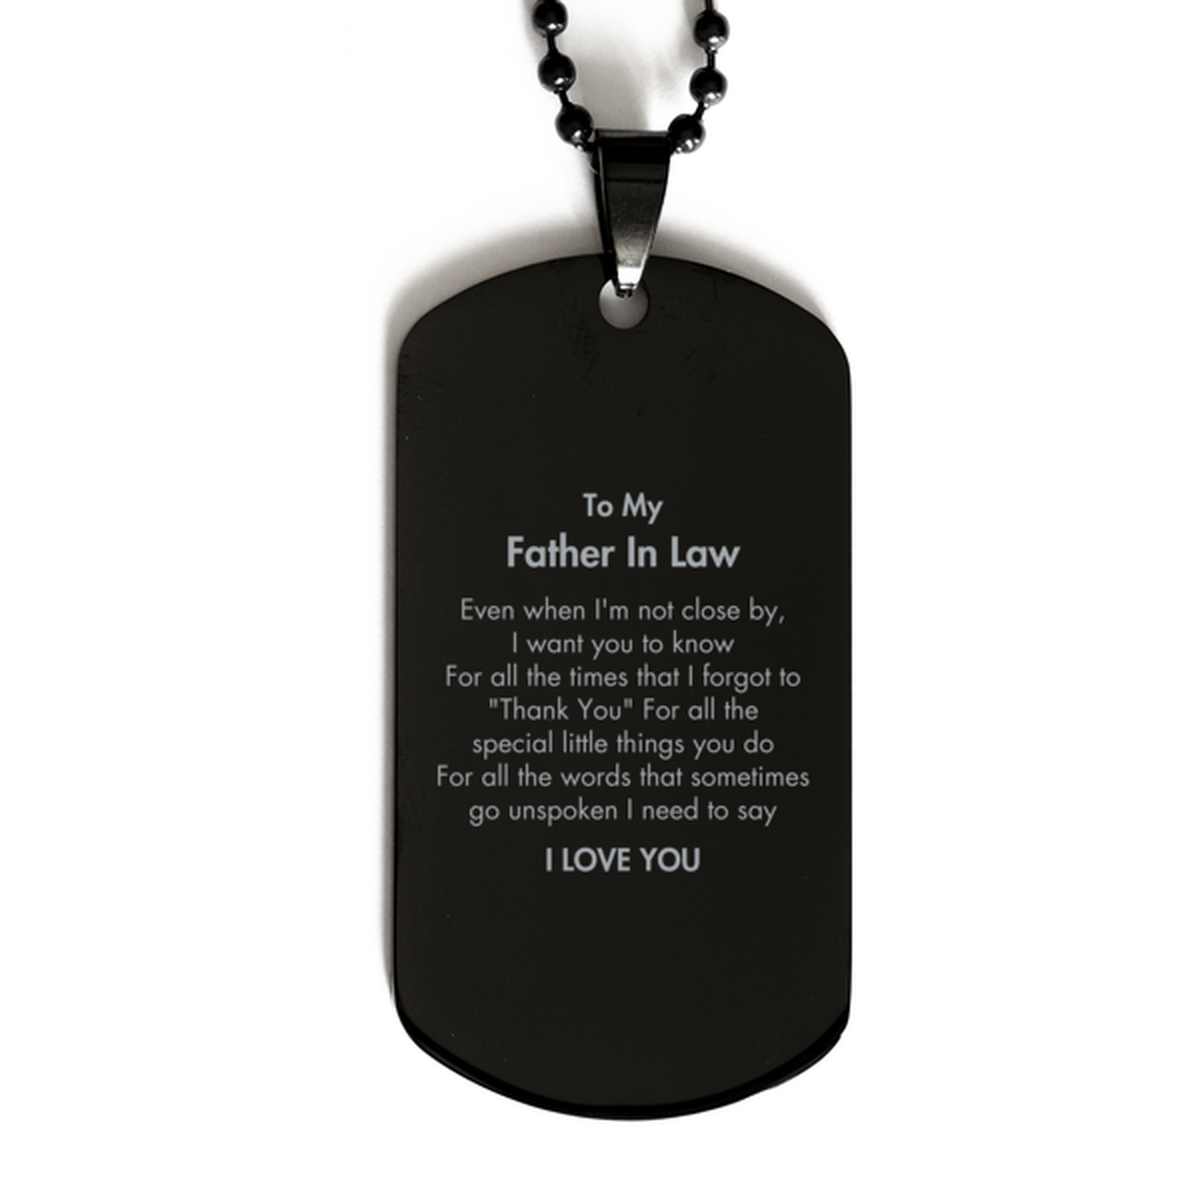 Thank You Gifts for Father In Law, Keepsake Black Dog Tag Gifts for Father In Law Birthday Mother's day Father's Day Father In Law For all the words That sometimes go unspoken I need to say I LOVE YOU